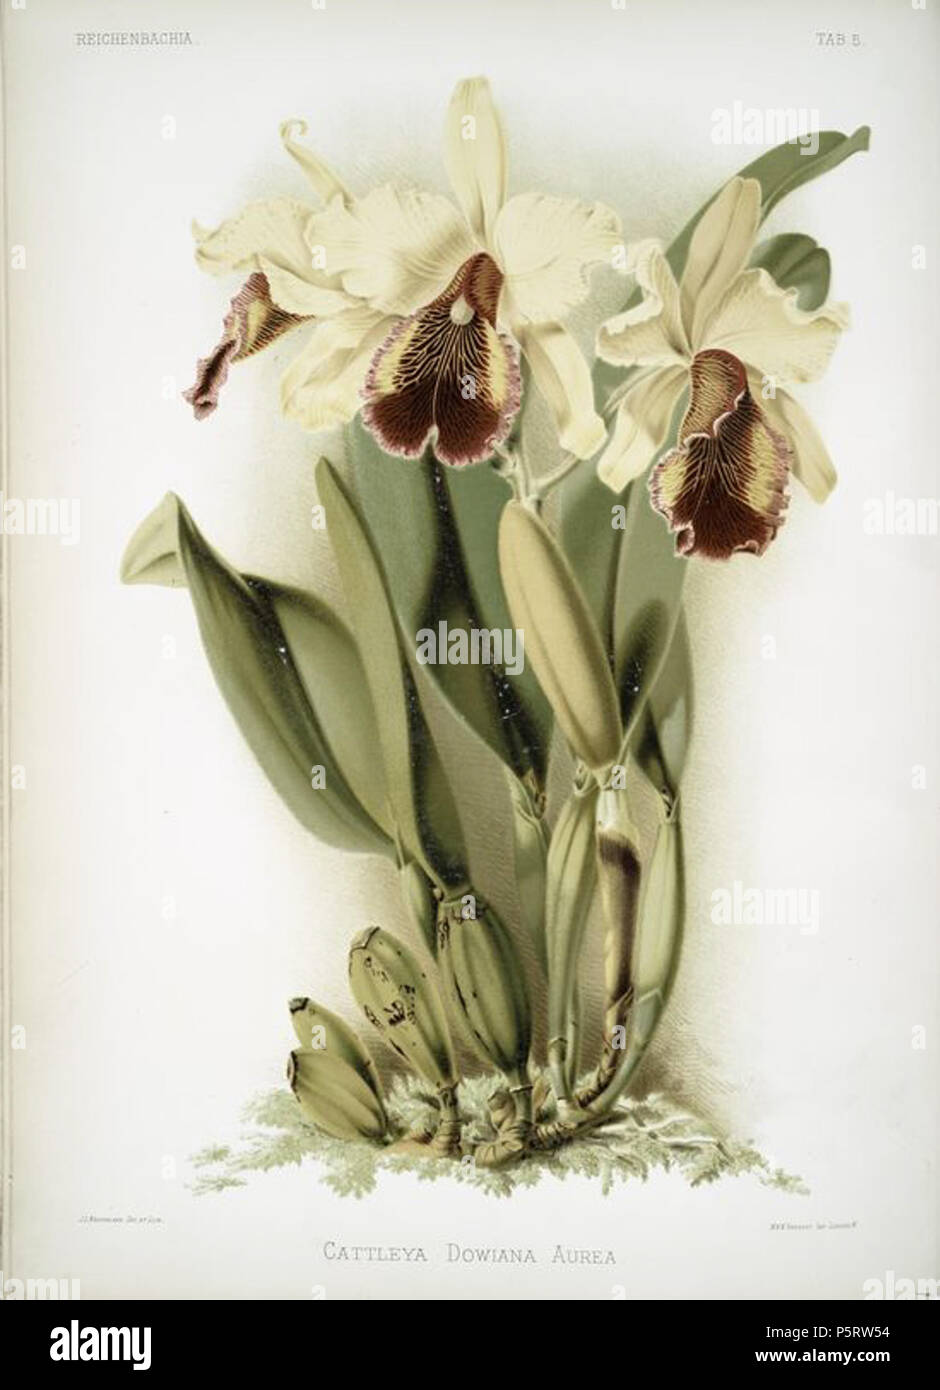 N/A. English: Cattleya dowiana aurea Image Title: Cattleya dowiana aurea. Creator: Mansell, Joseph -- Lithographer Additional Name(s): Sander, F. (Frederick), 1847-1920 -- Author Moon, H. G -- Artist Medium: Chromolithographs Specific Material Type: Prints Item Physical Description: 52 x 38 cm. Item/Page/Plate: Tab 5 Standard Reference: Nissen, 1722. Source: Reichenbachia. Orchids illustrated and described, by F. Sander ... 1st[-2d] Series. Source Description: 4 v. pl. en coul. fol. From Reichenbachia, Series I Vol I Plate 5 . 1888 31 March 2011 (original upload date). Sander, Frederick, 1847- Stock Photo